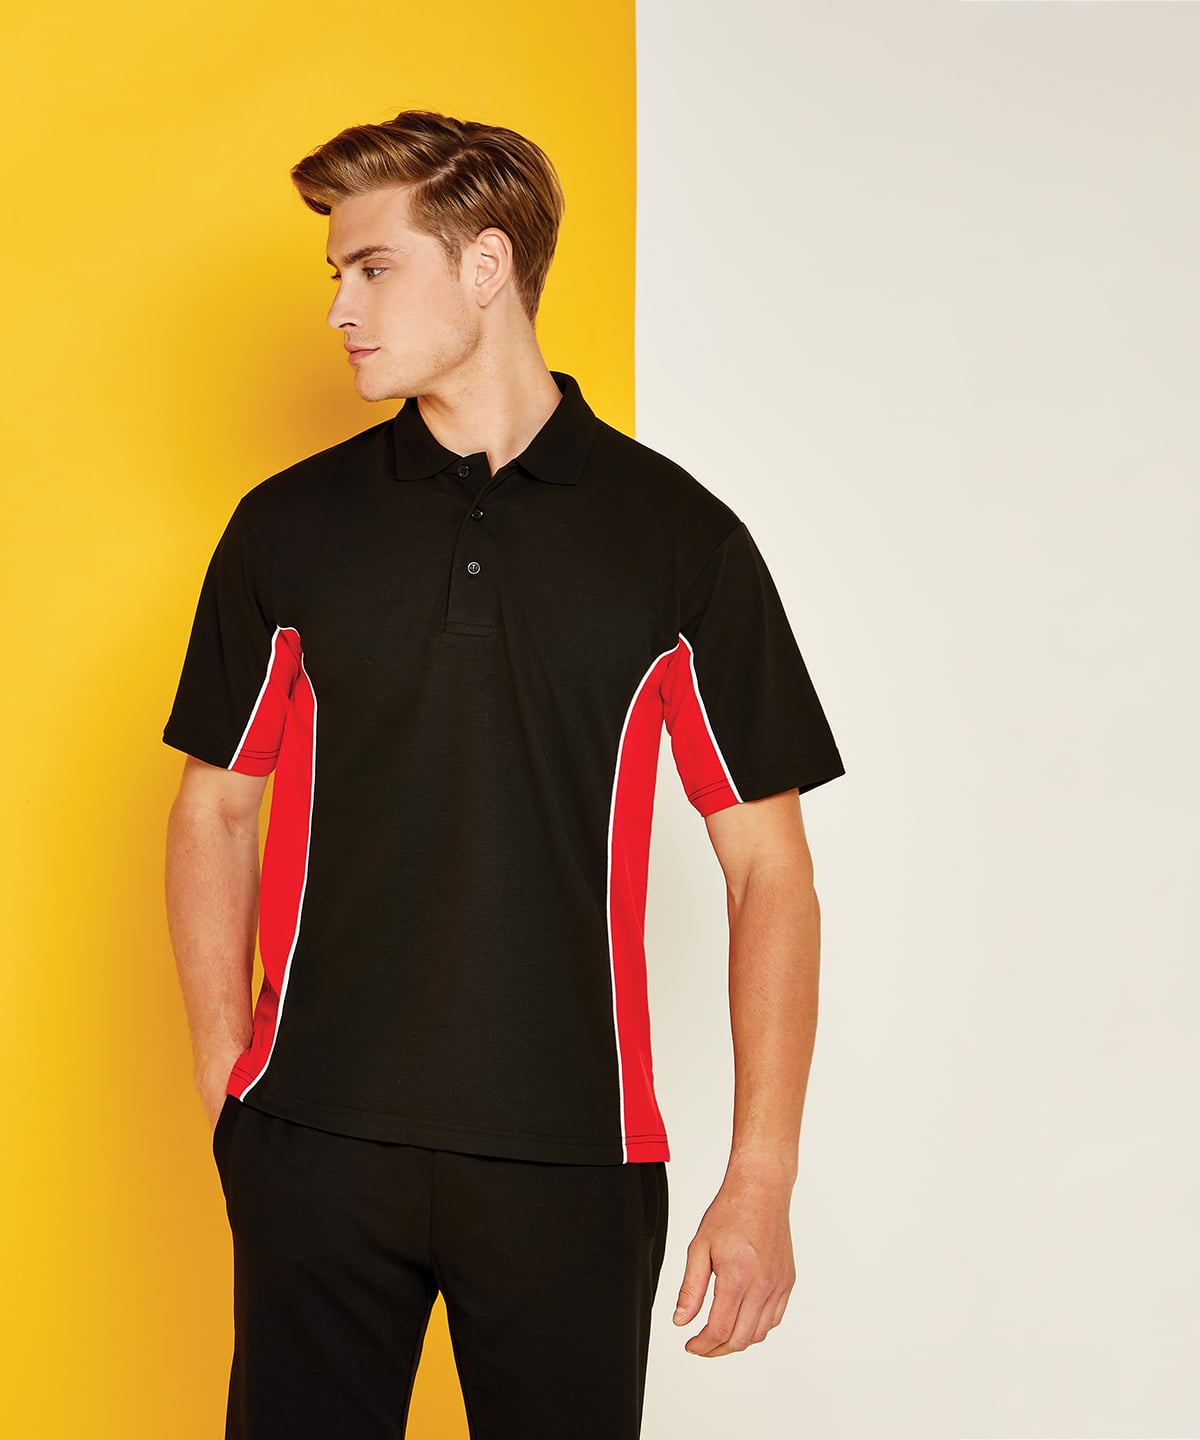 black and red polo kk475